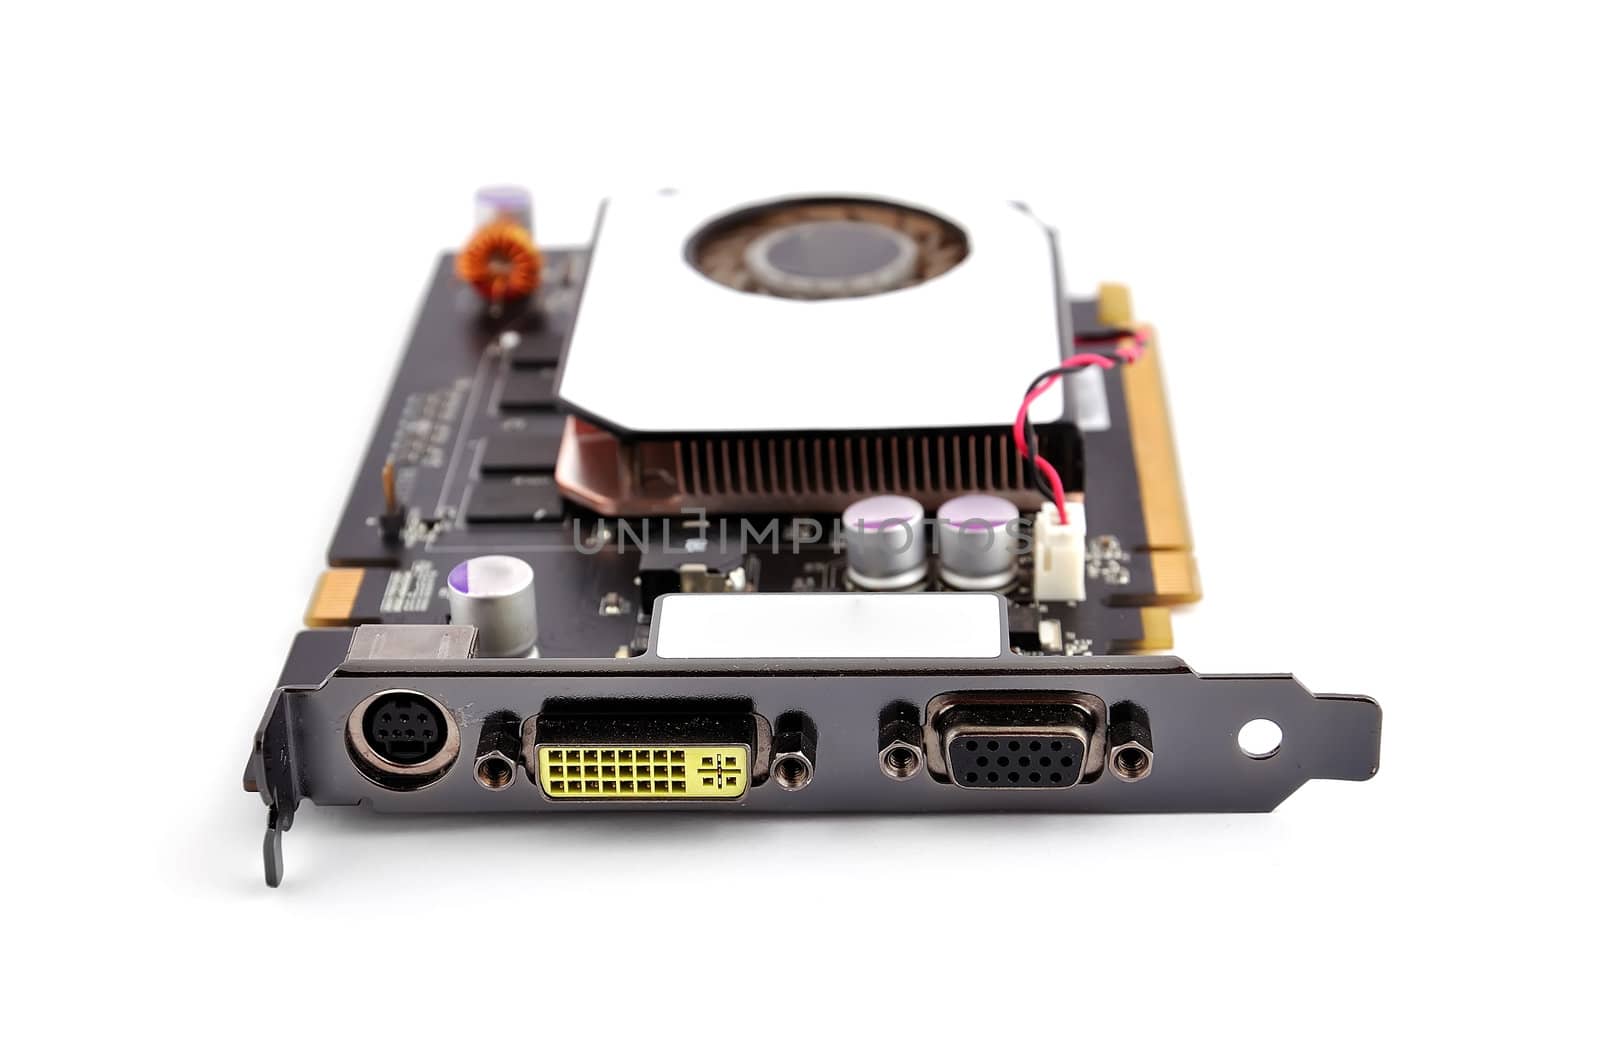 video card  on a white background